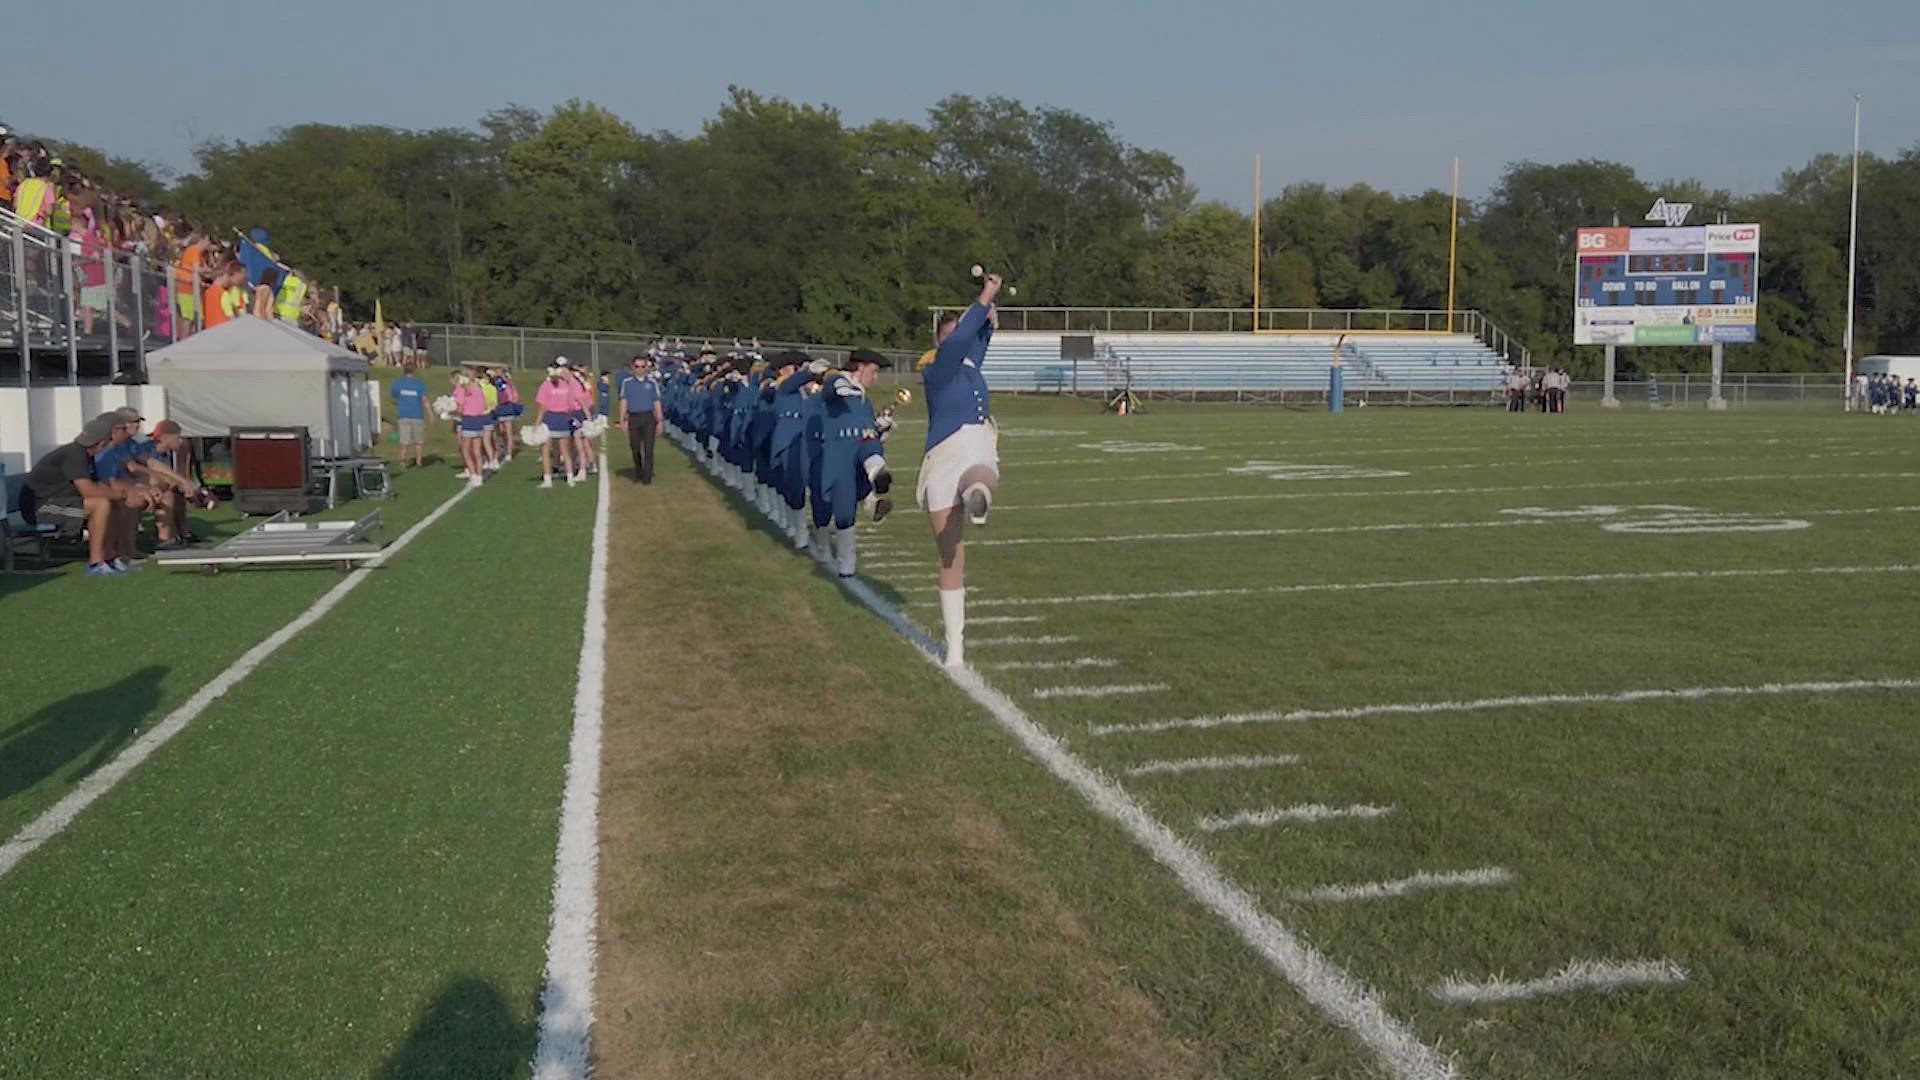 Band of the Week for Week 2 - The Anthony Wayne Marching Generals